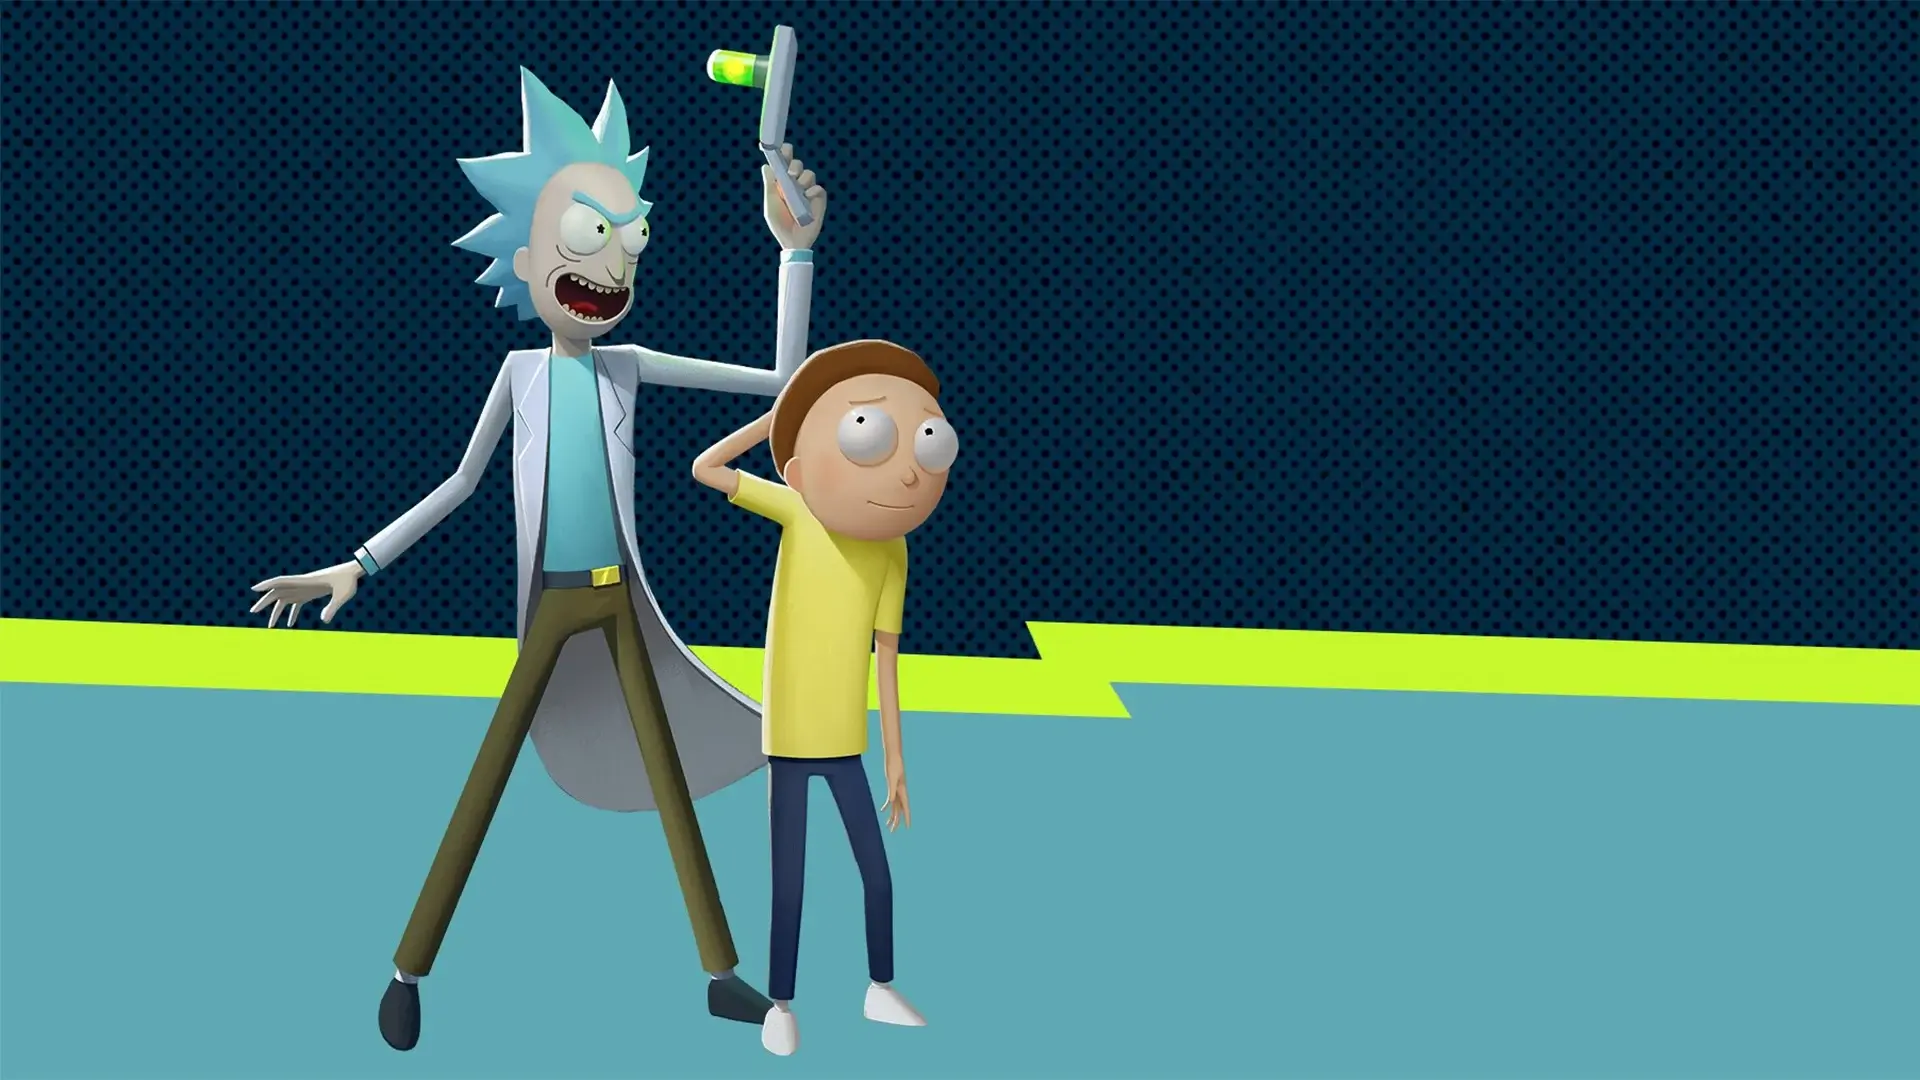 Morty and Rick Multiversus (August 2022) Who are Rick and Morty Plumbus? What is the Release Date?